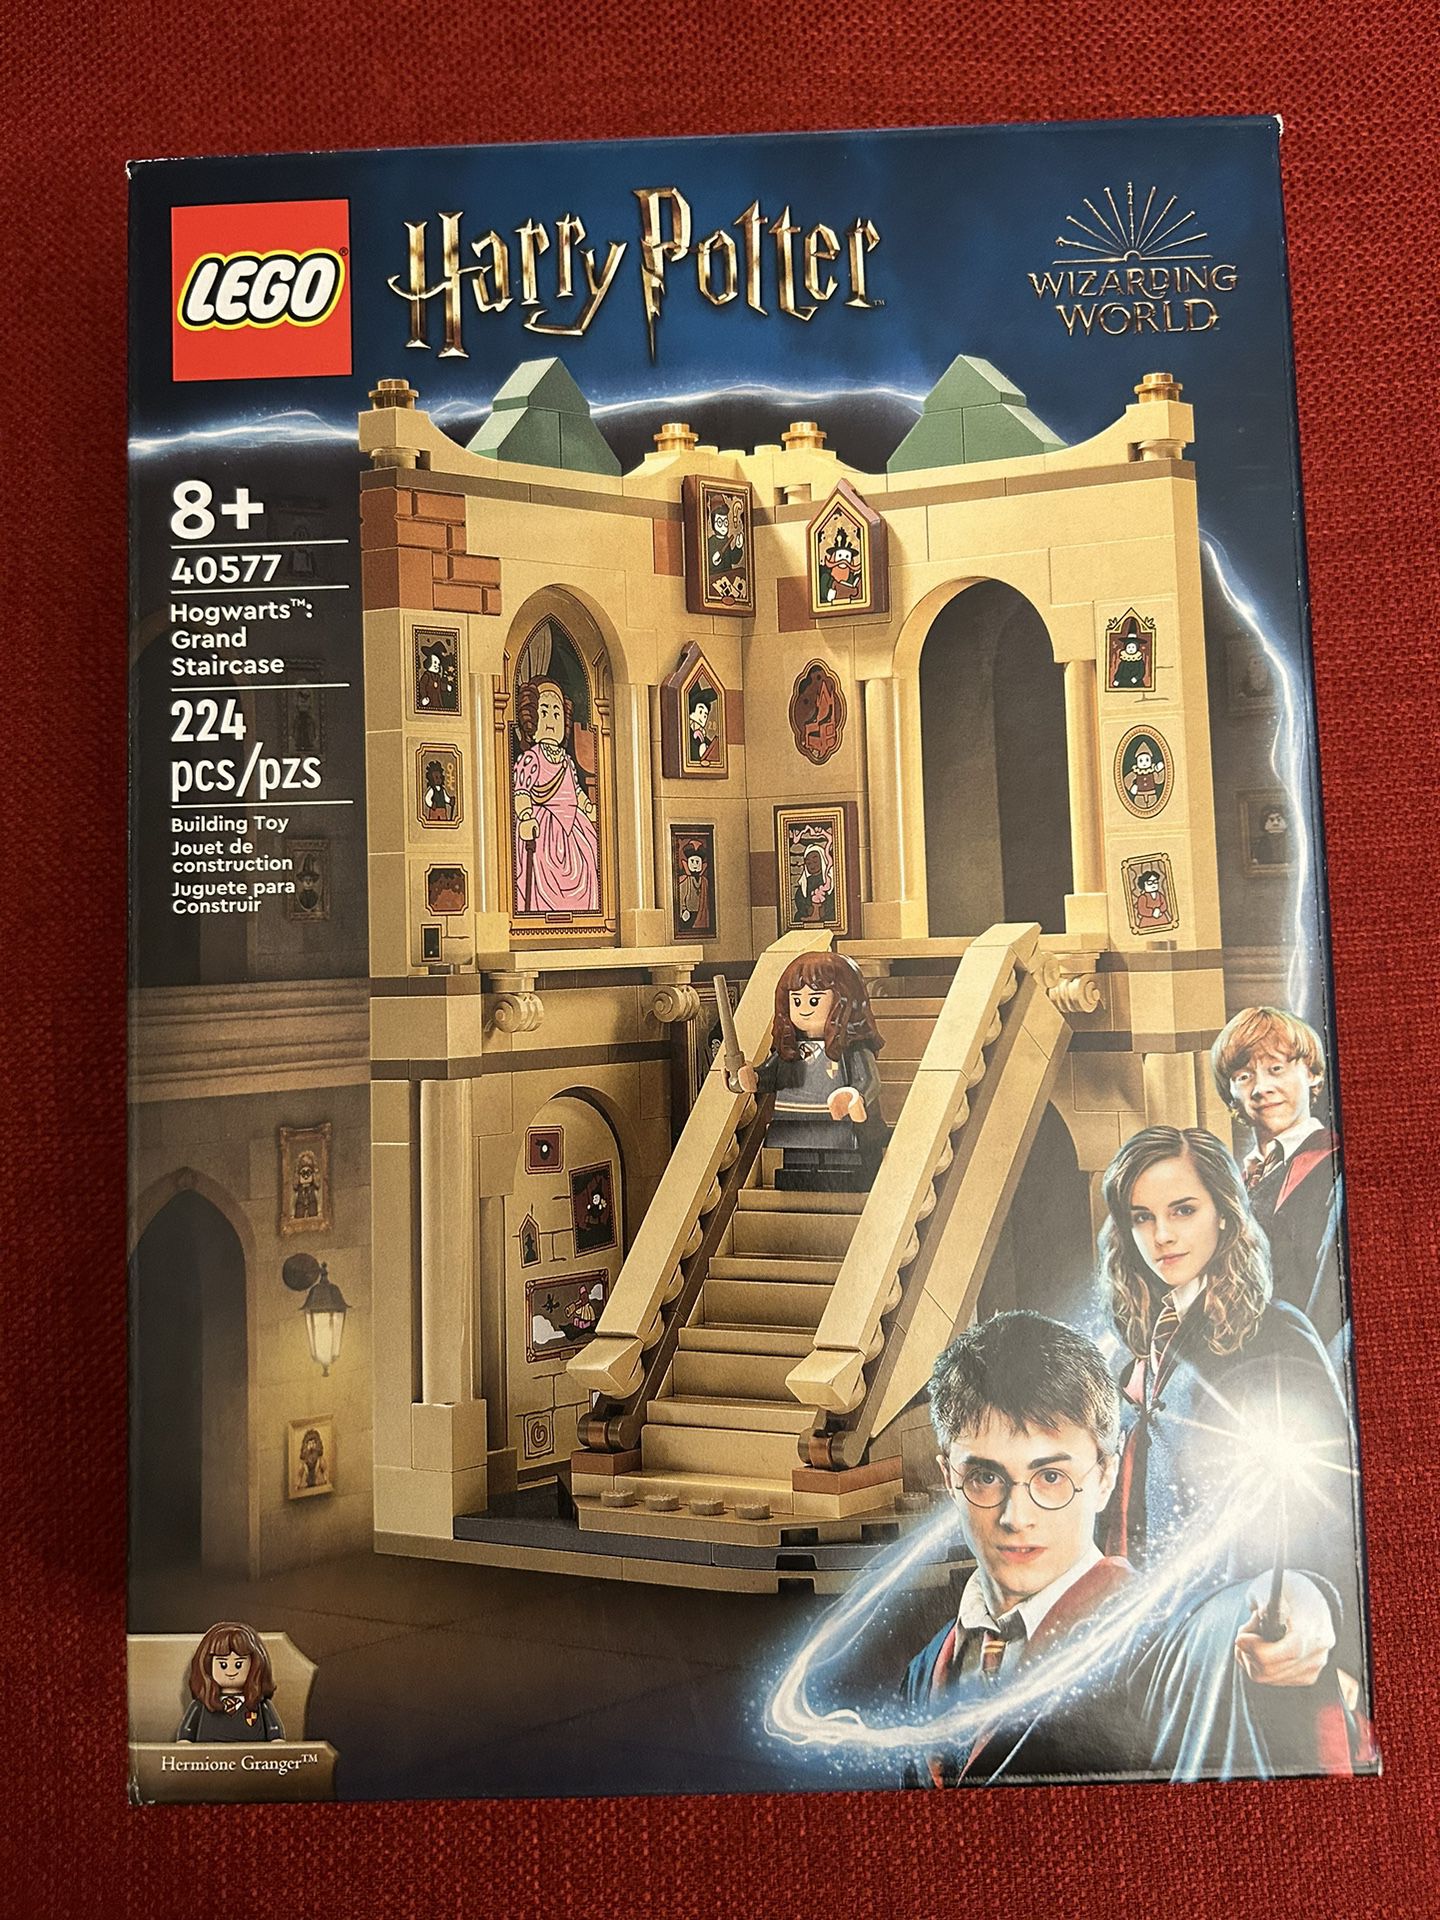 LEGO Harry Potter Hogwarts Grand Staircase 40577, Sealed, New In Box